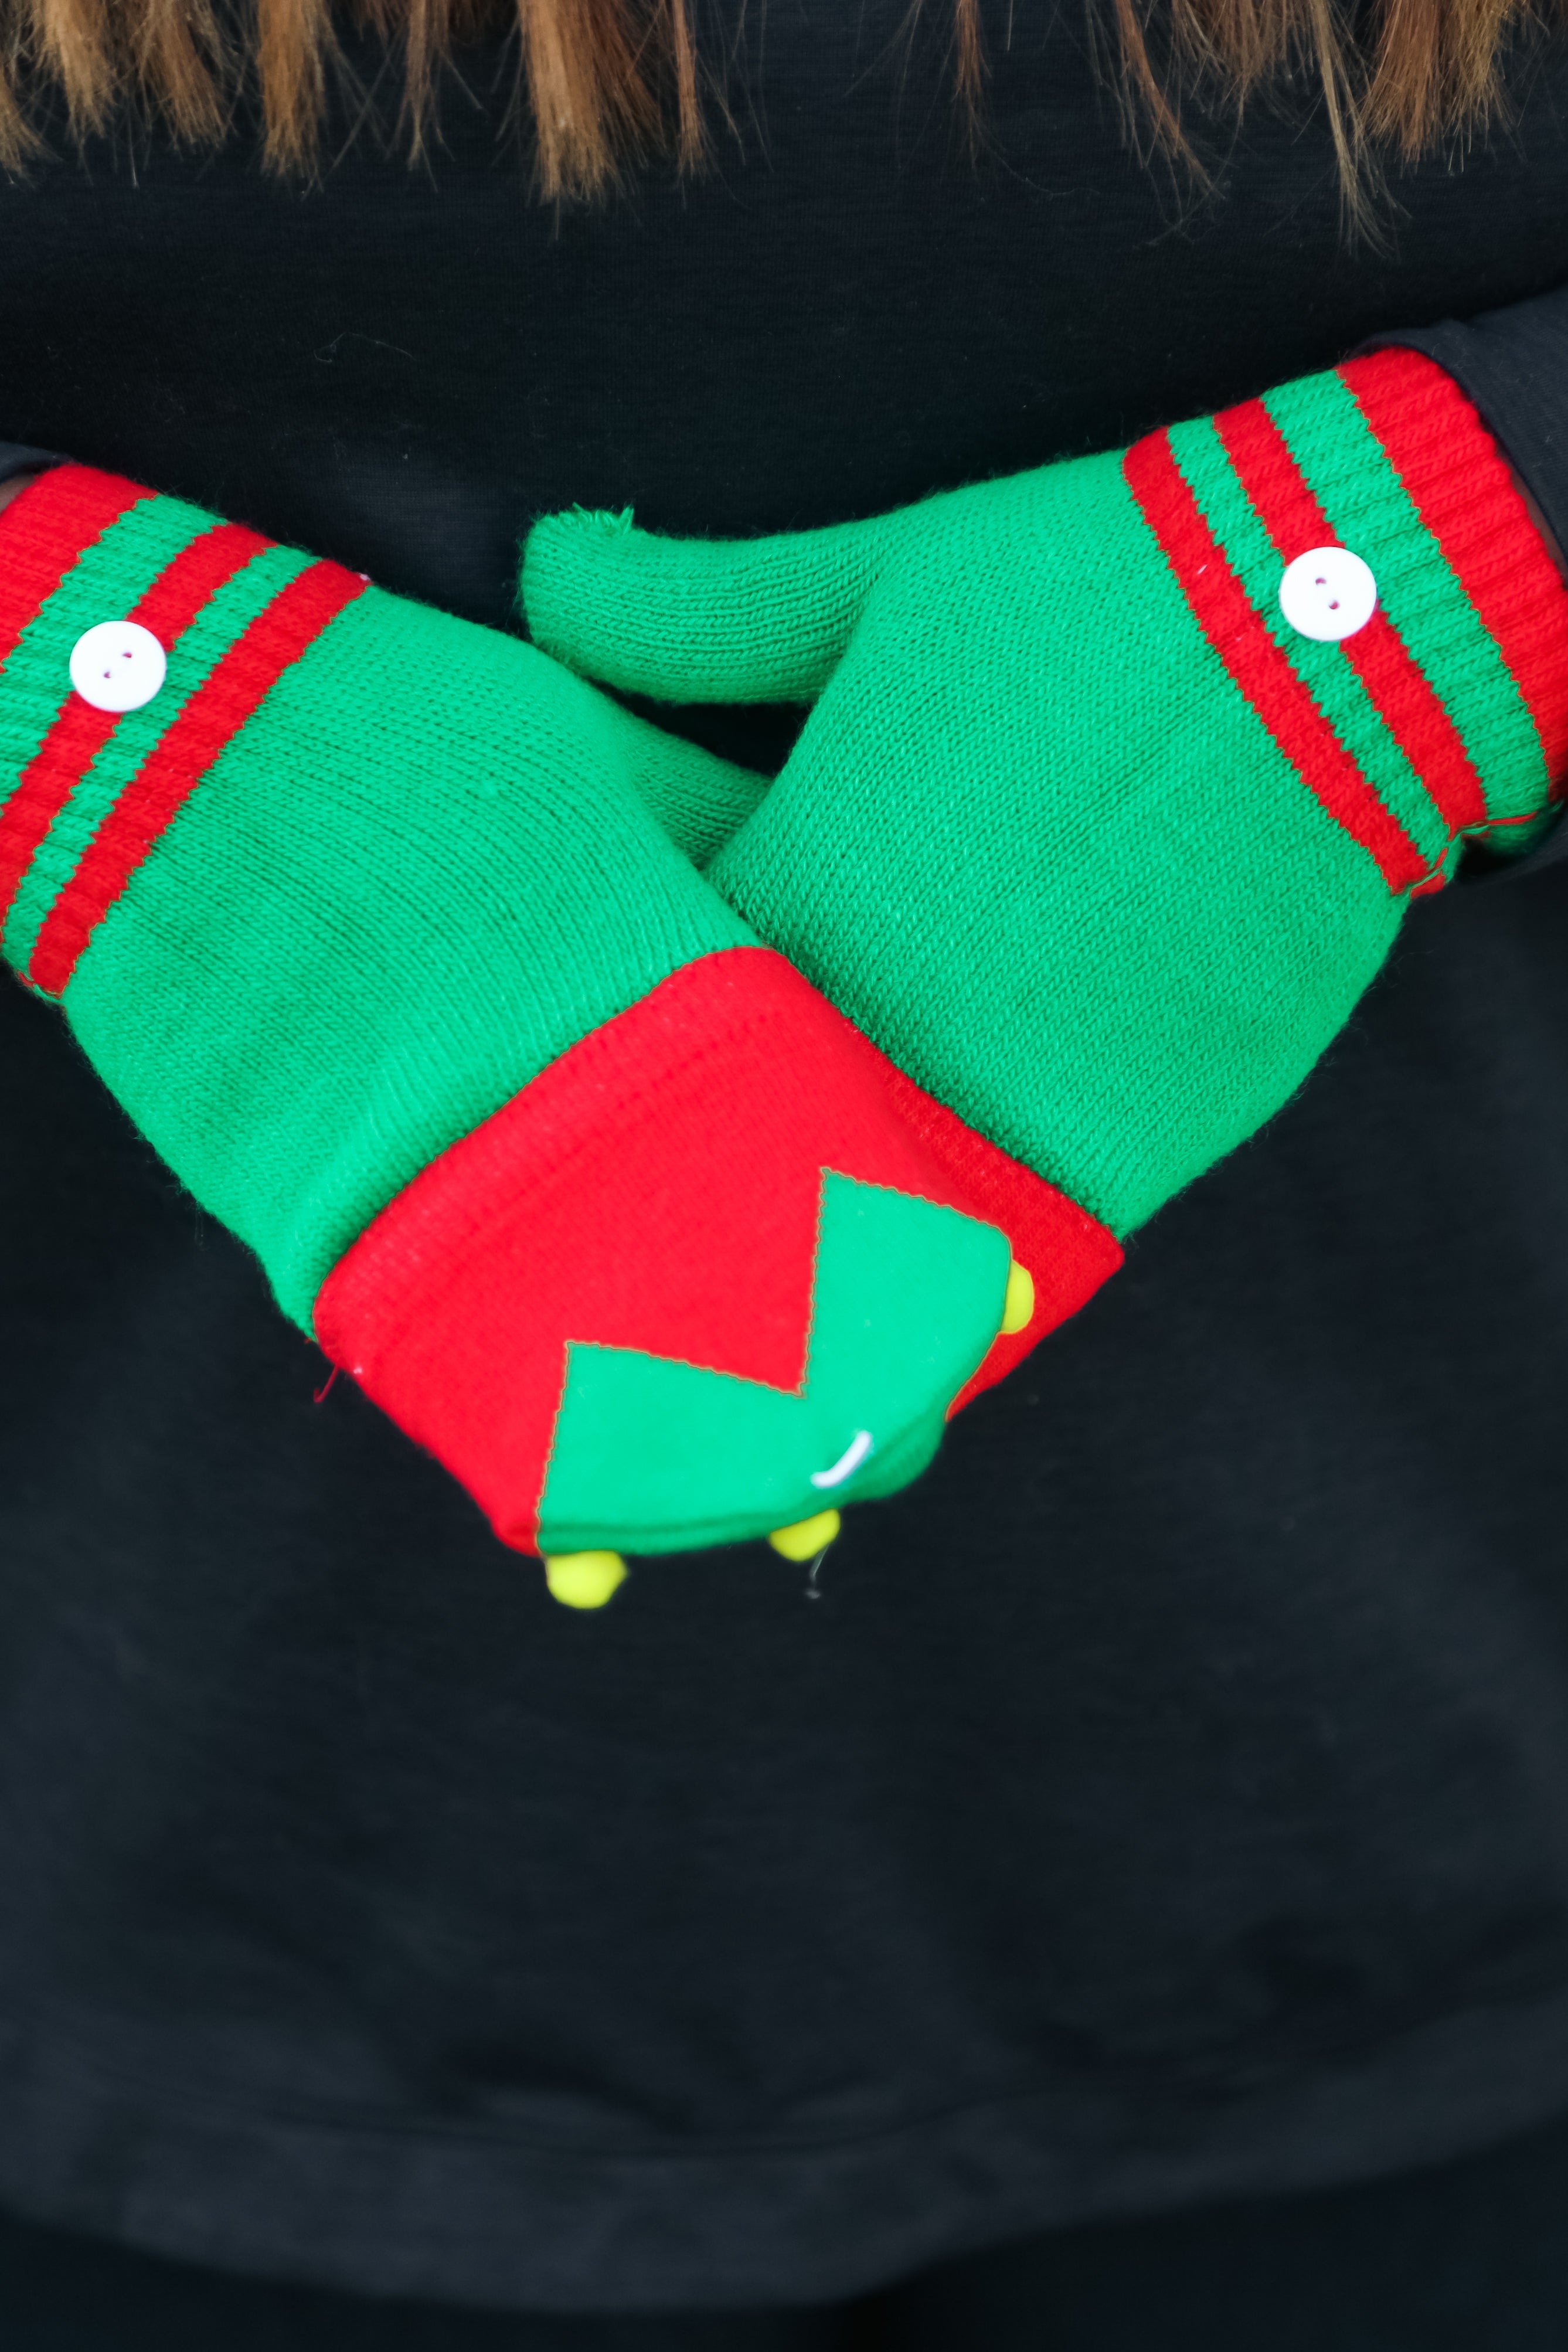 Red & Green Elf Fingerless Gloves with Convertible Mittens ICON